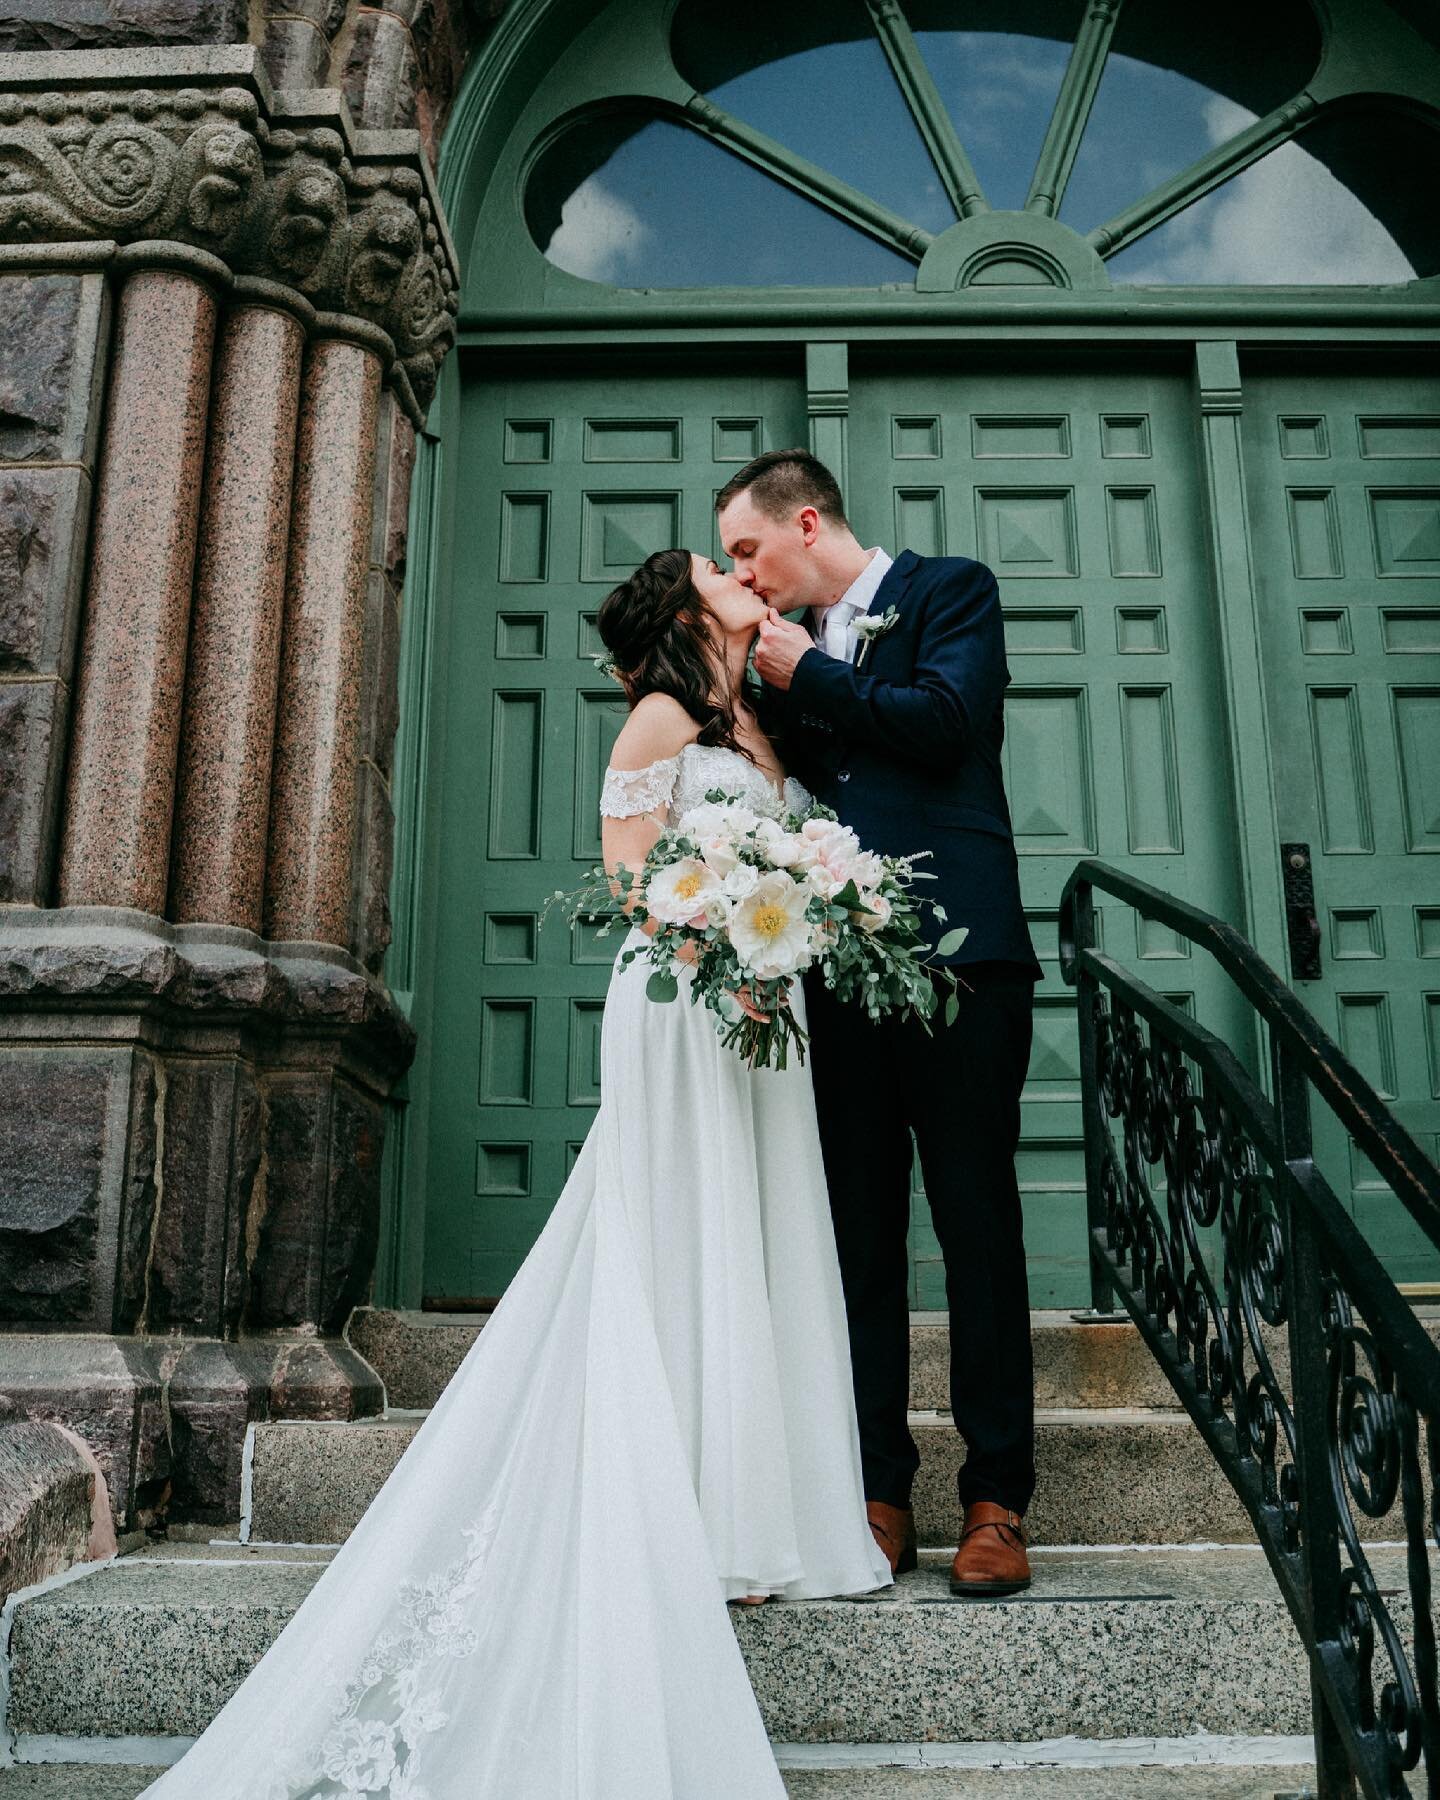 I definitely have NOT posted enough of @rachaelandersen &amp; @steve_m_payne&rsquo;s awesome day. I just realized when I posted their sneak peeks while back,  Instagram went wonky and posted duplicates of the same photo. We can&rsquo;t have that! 
Ke